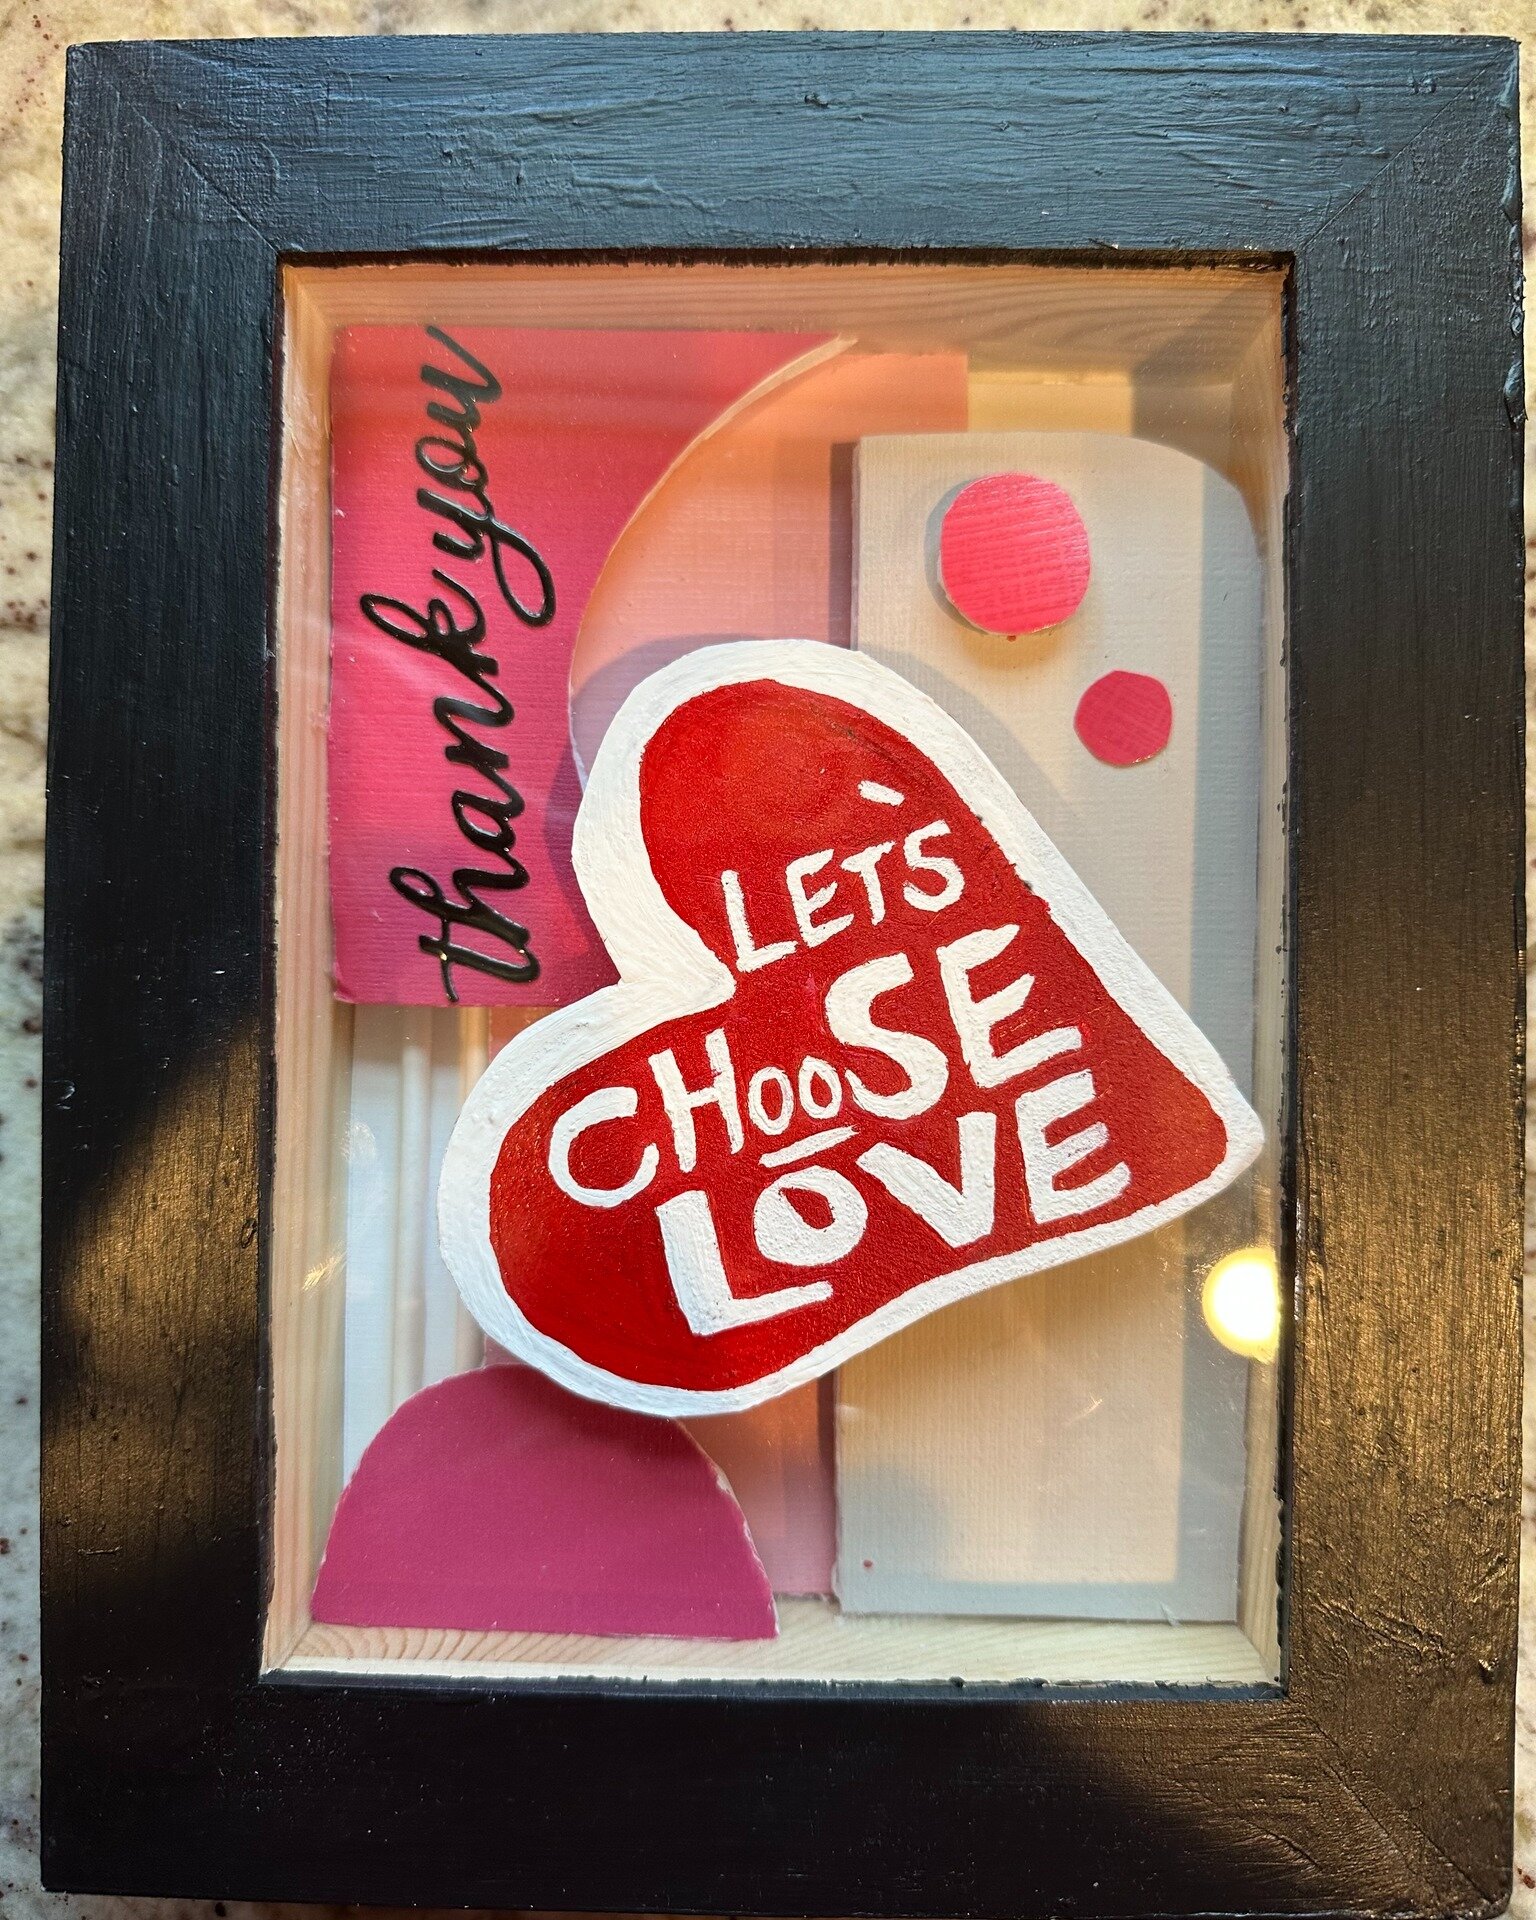 ❤️ Gratitude Post! ❤️

We just want to take a moment to share how AMAZING our grantees are! @iseastudio.art, THANK YOU for the most thoughtful gift!!! Your beautiful art and kind words fill our hearts. 

Let's Choose Love is founded on the dream of c